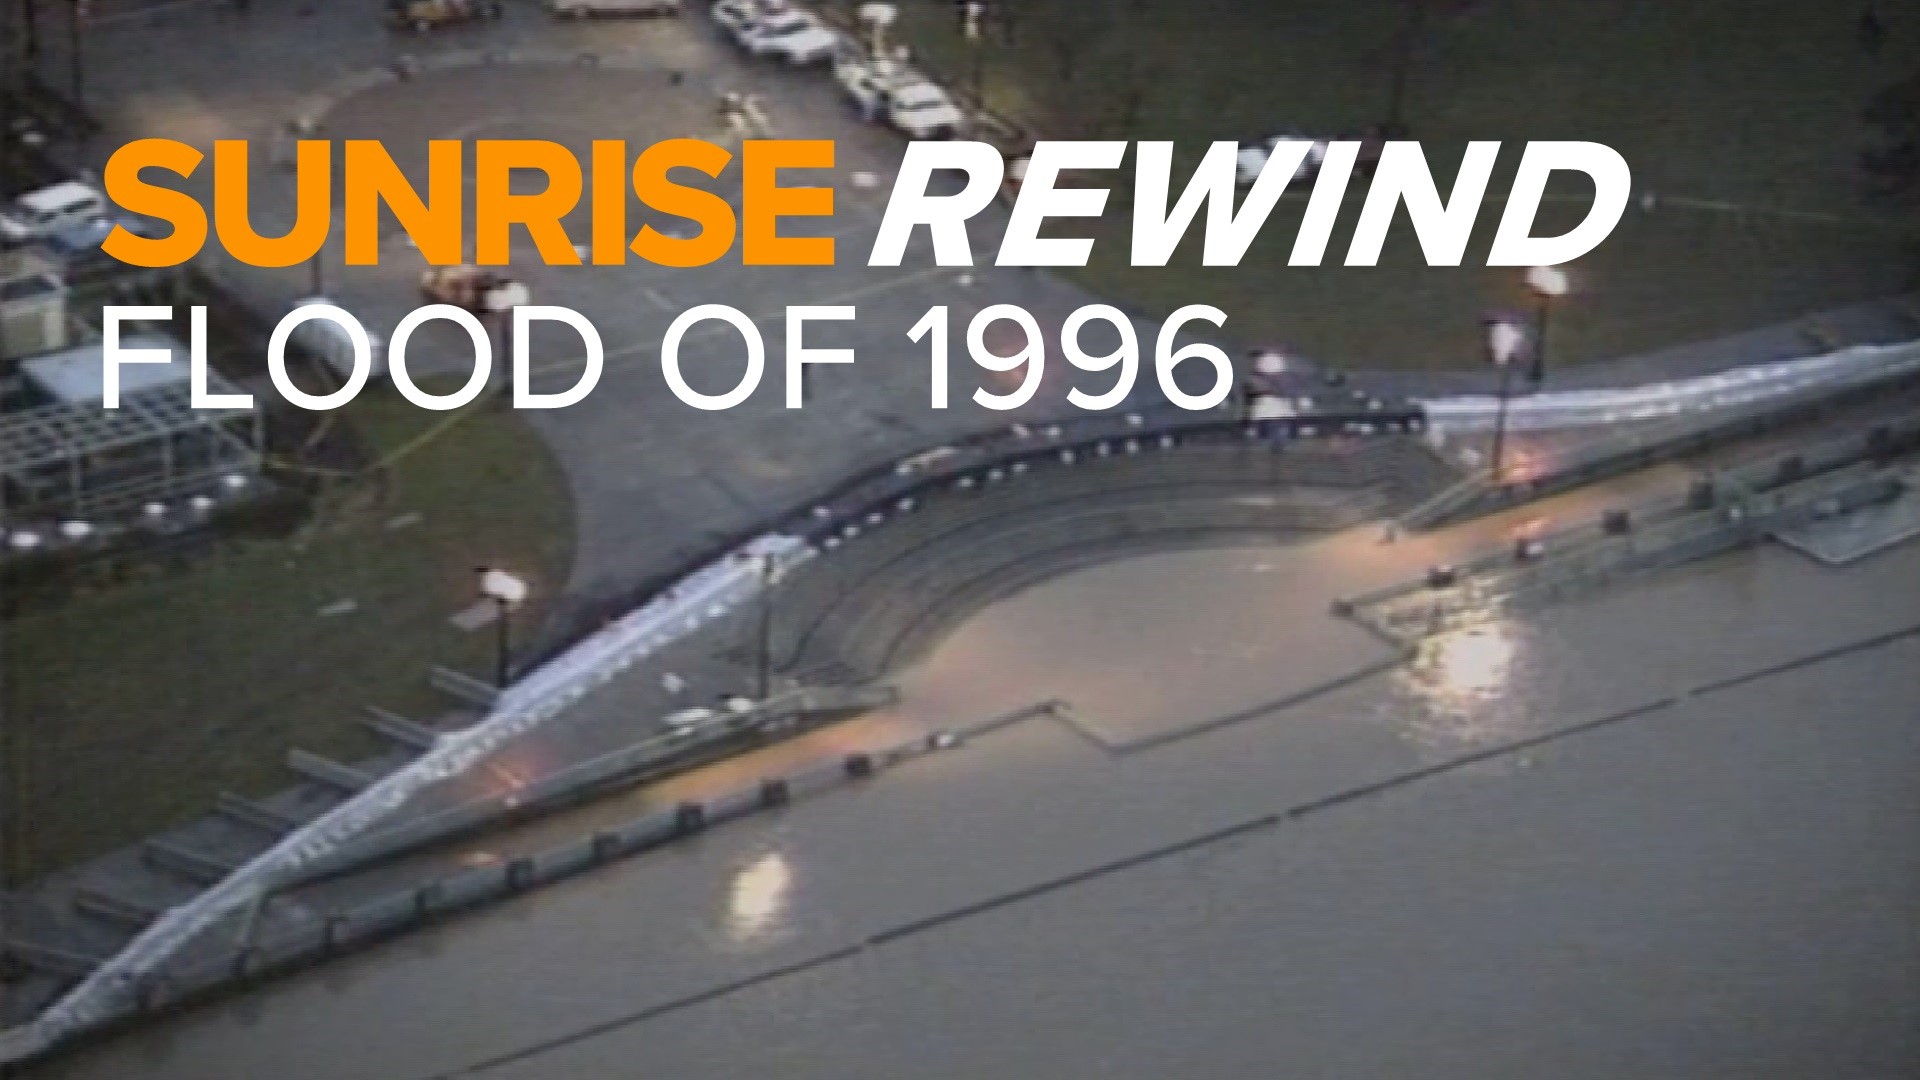 In early February 1996, a combination of rare weather events lead to flooding across the Willamette Valley.